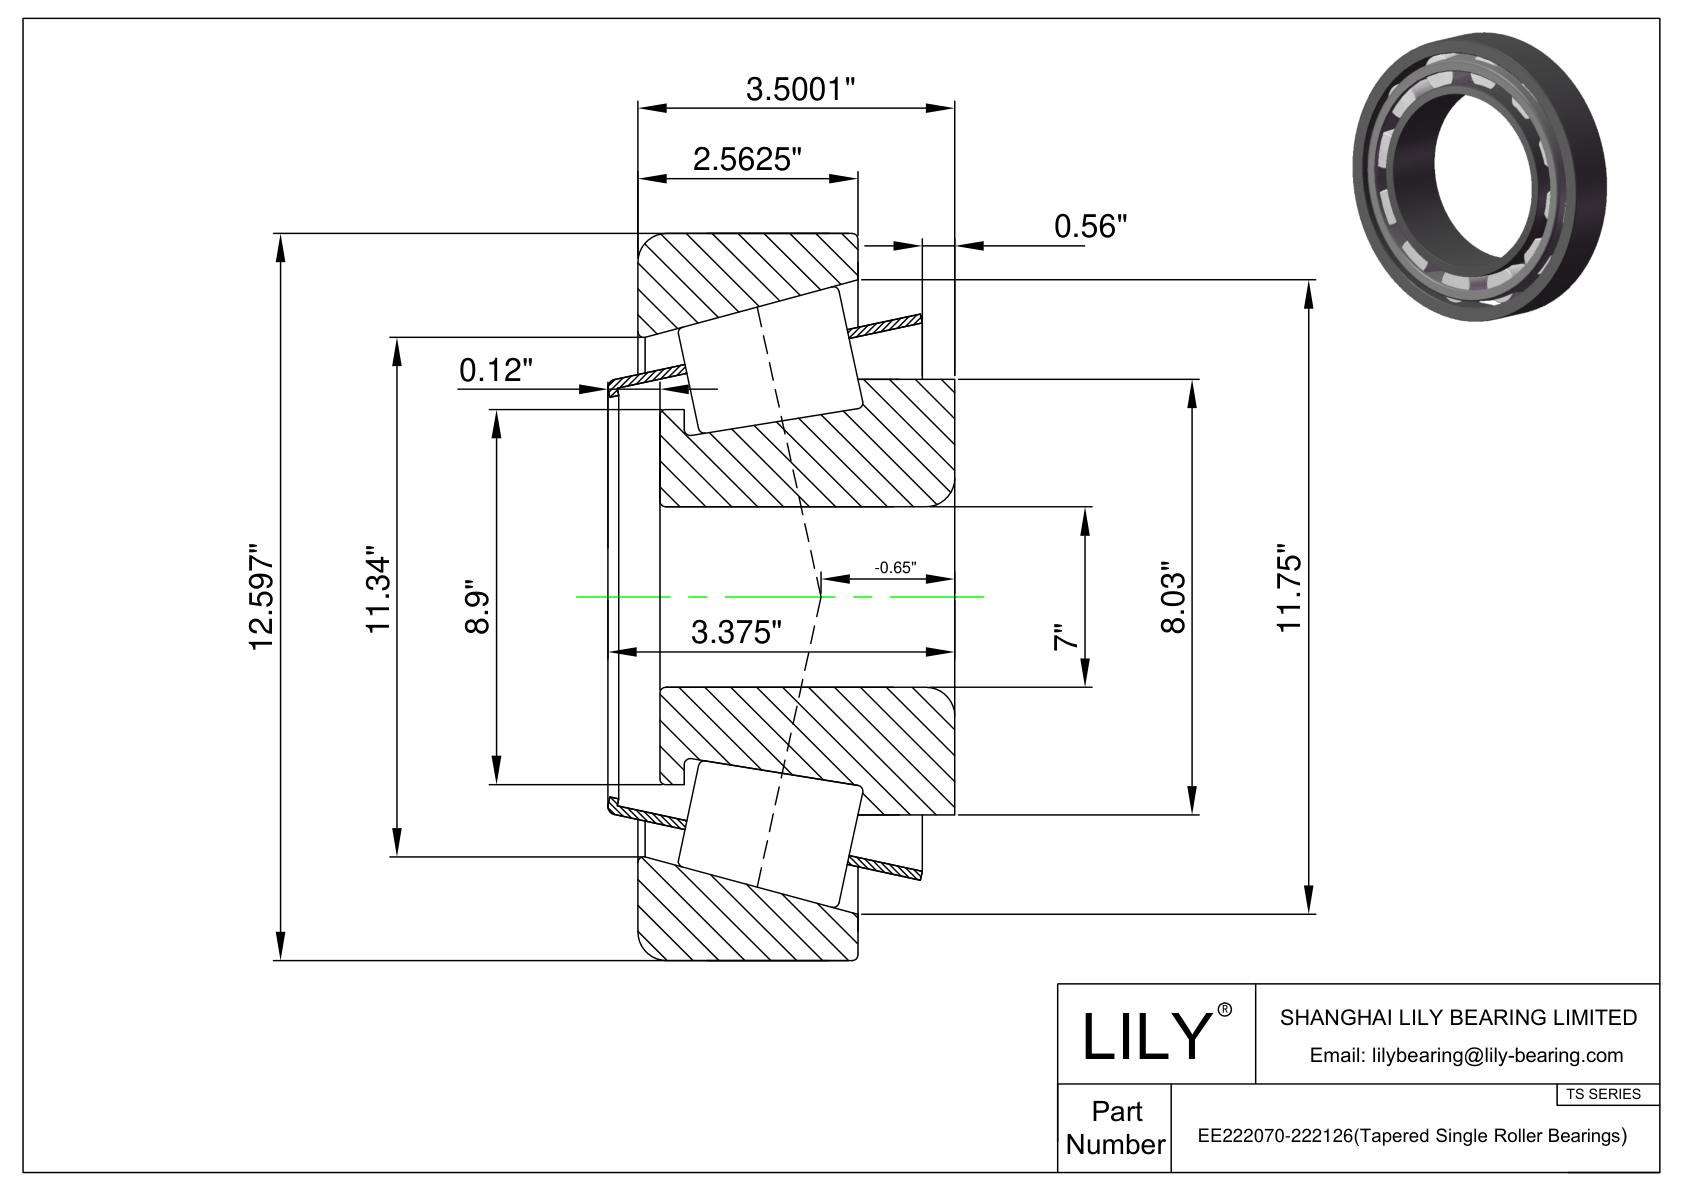 EE222070-222126 TS (Tapered Single Roller Bearings) (Imperial) cad drawing